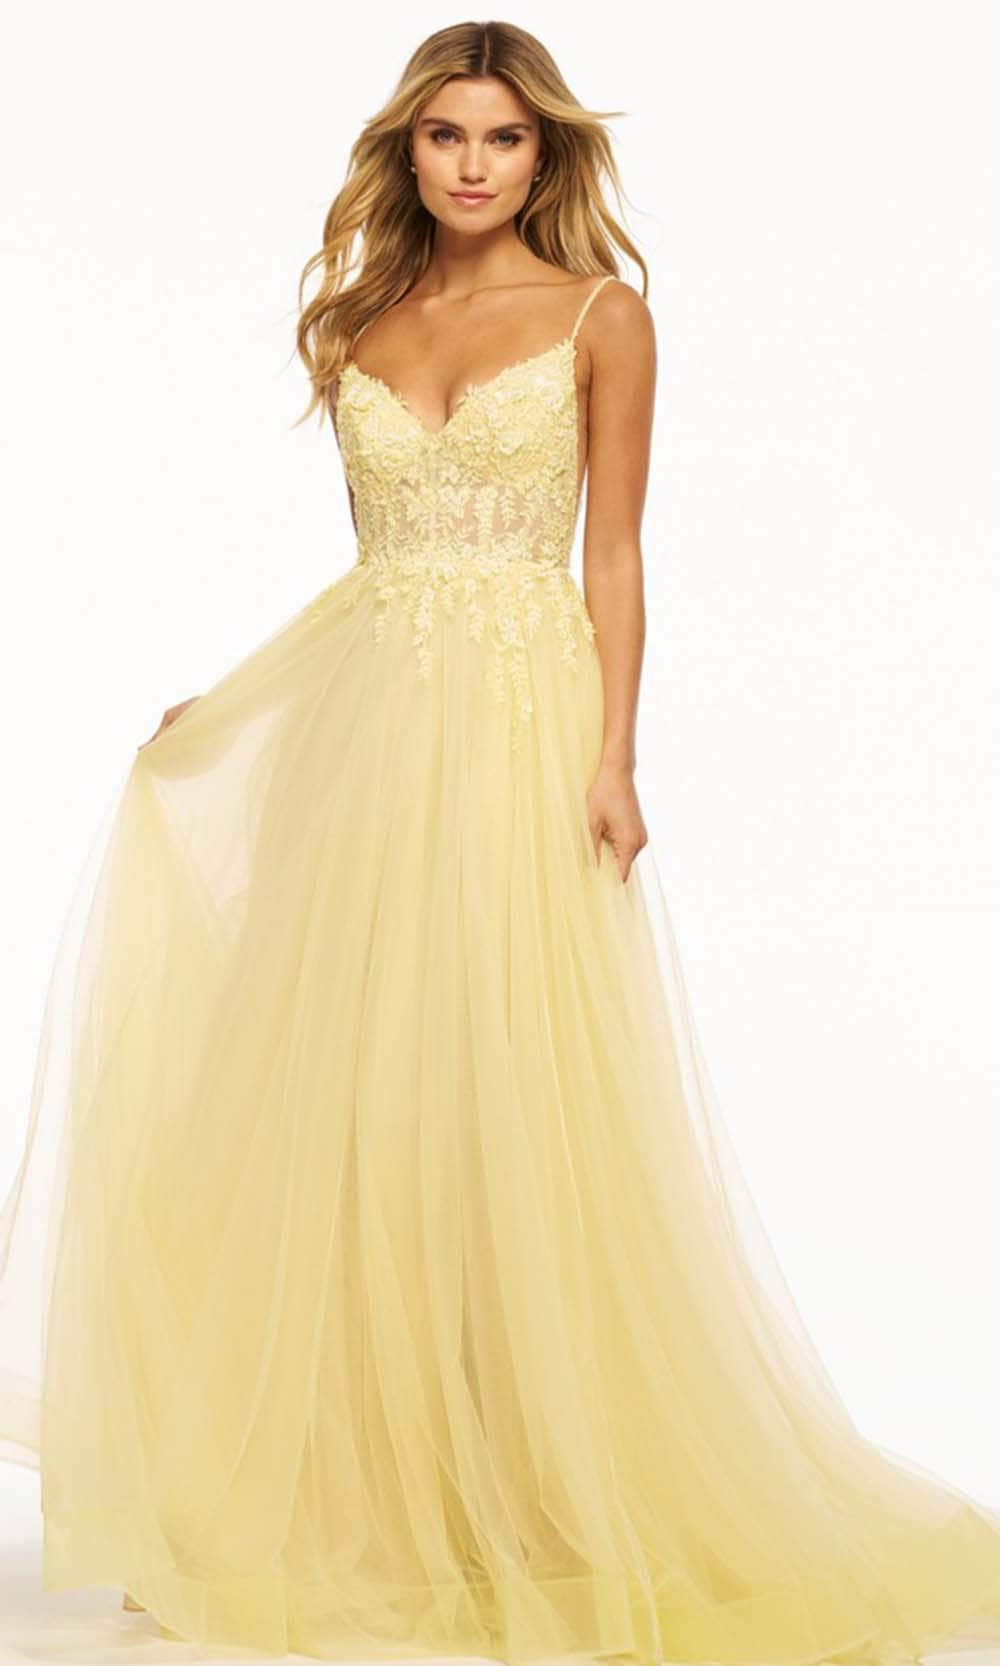 Image of Sherri Hill 55998 - Sleeveless A-Line Gown